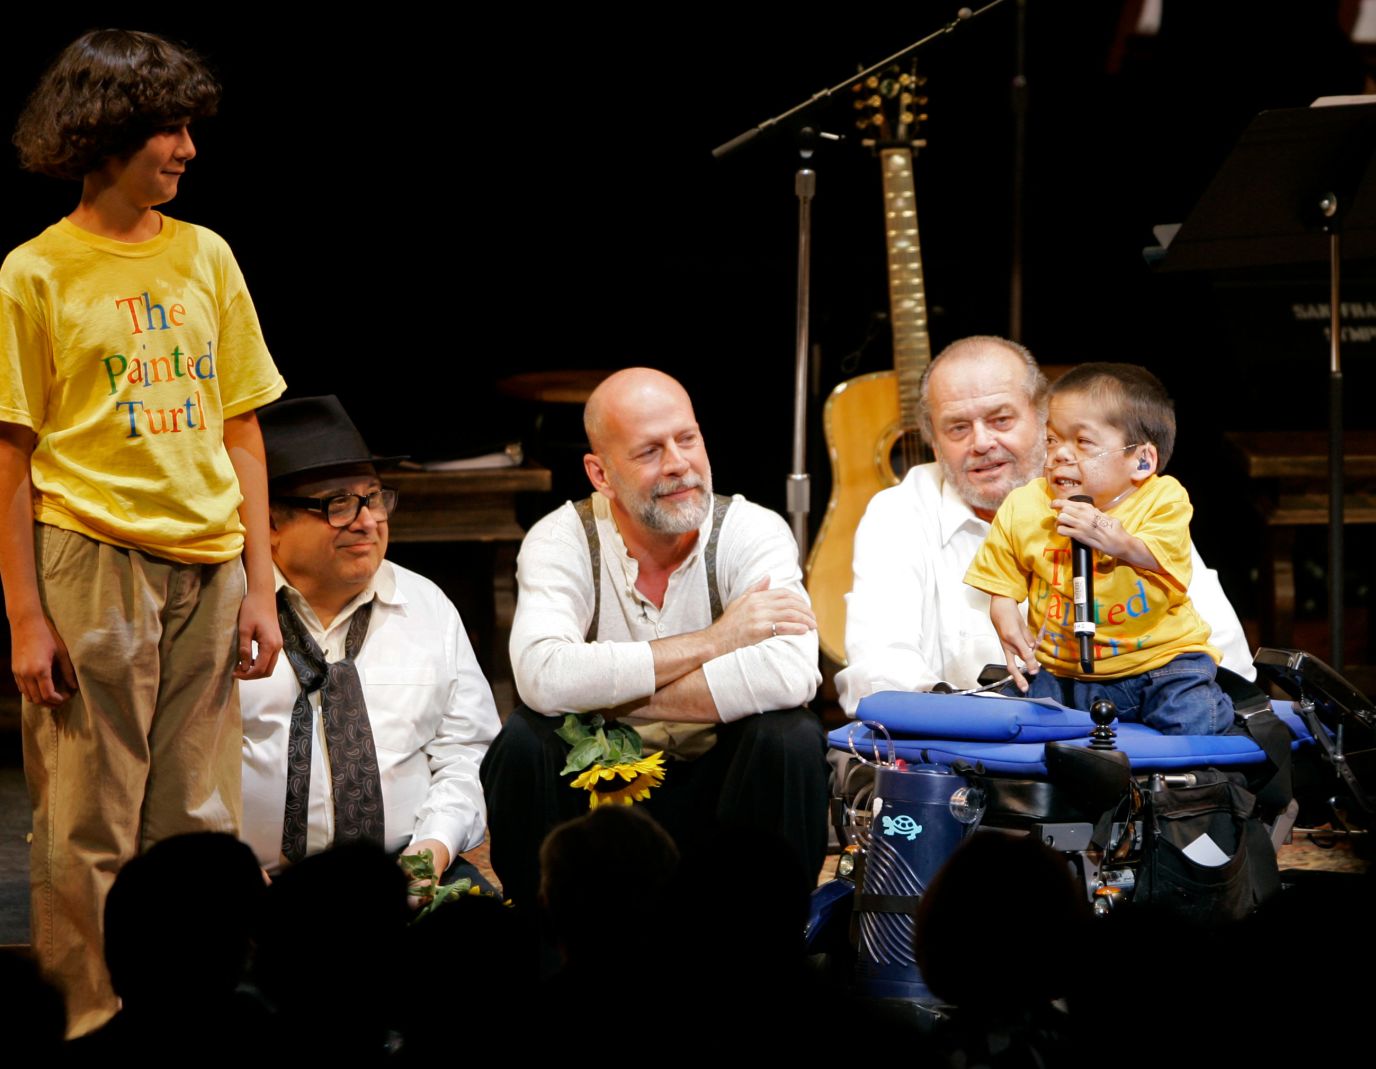 Willis and fellow actors Danny DeVito and Jack Nicholson listen to a boy give thanks during the curtain call for a staged reading of "The World of Nick Adams" in 2008. The event benefited the Painted Turtle, a camp and family care center founded by actor Paul Newman for children with life-threatening illnesses.